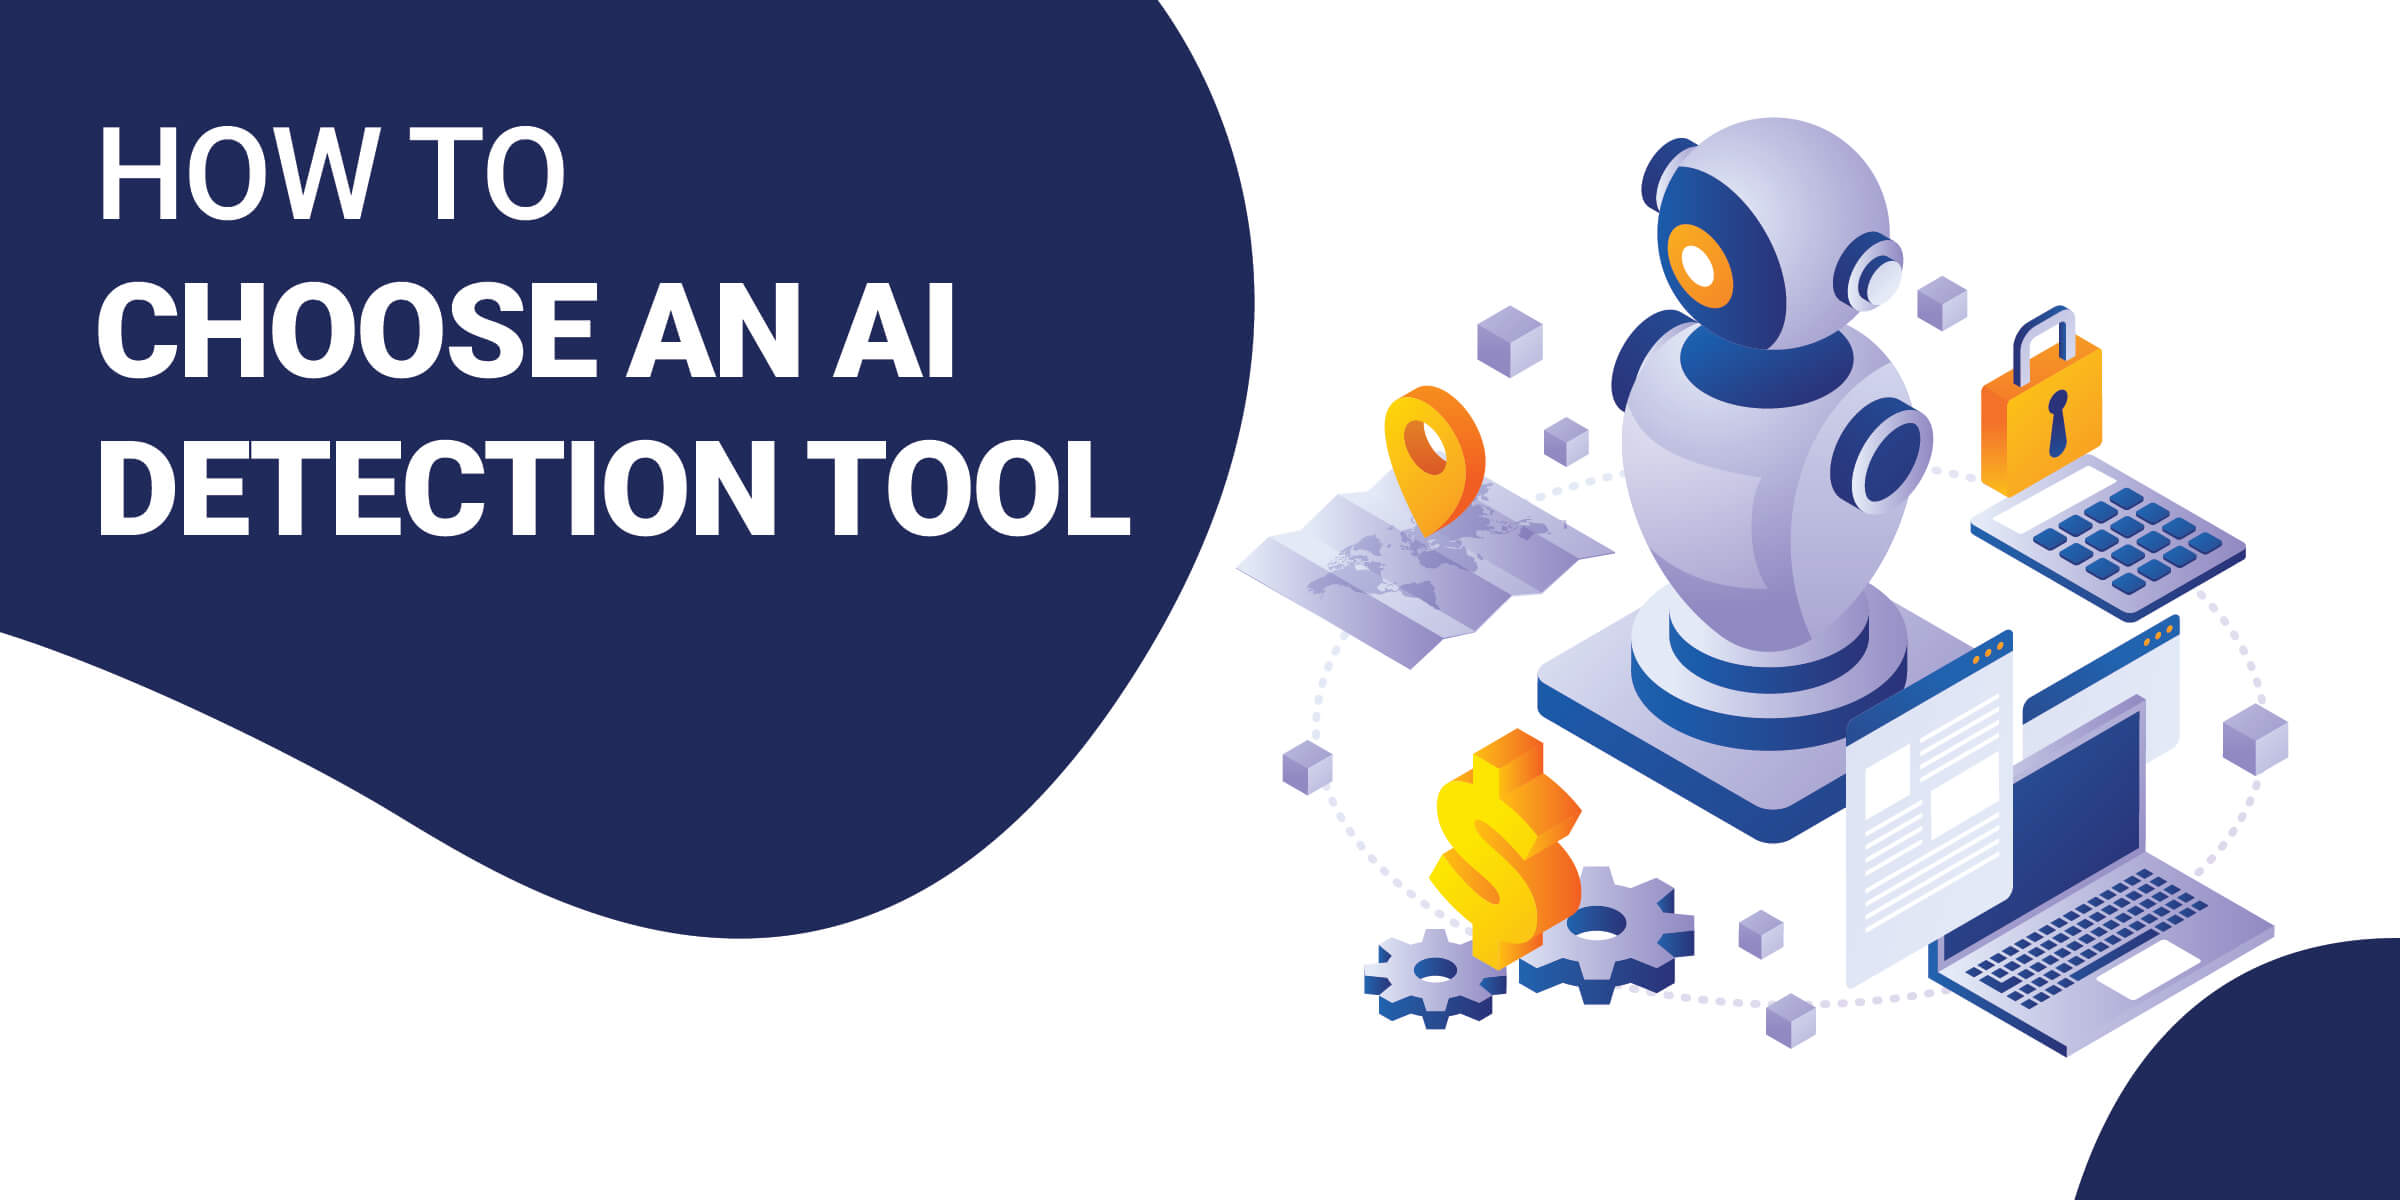 8 Best AI Detection Tools [So You Don't Get Penalized]